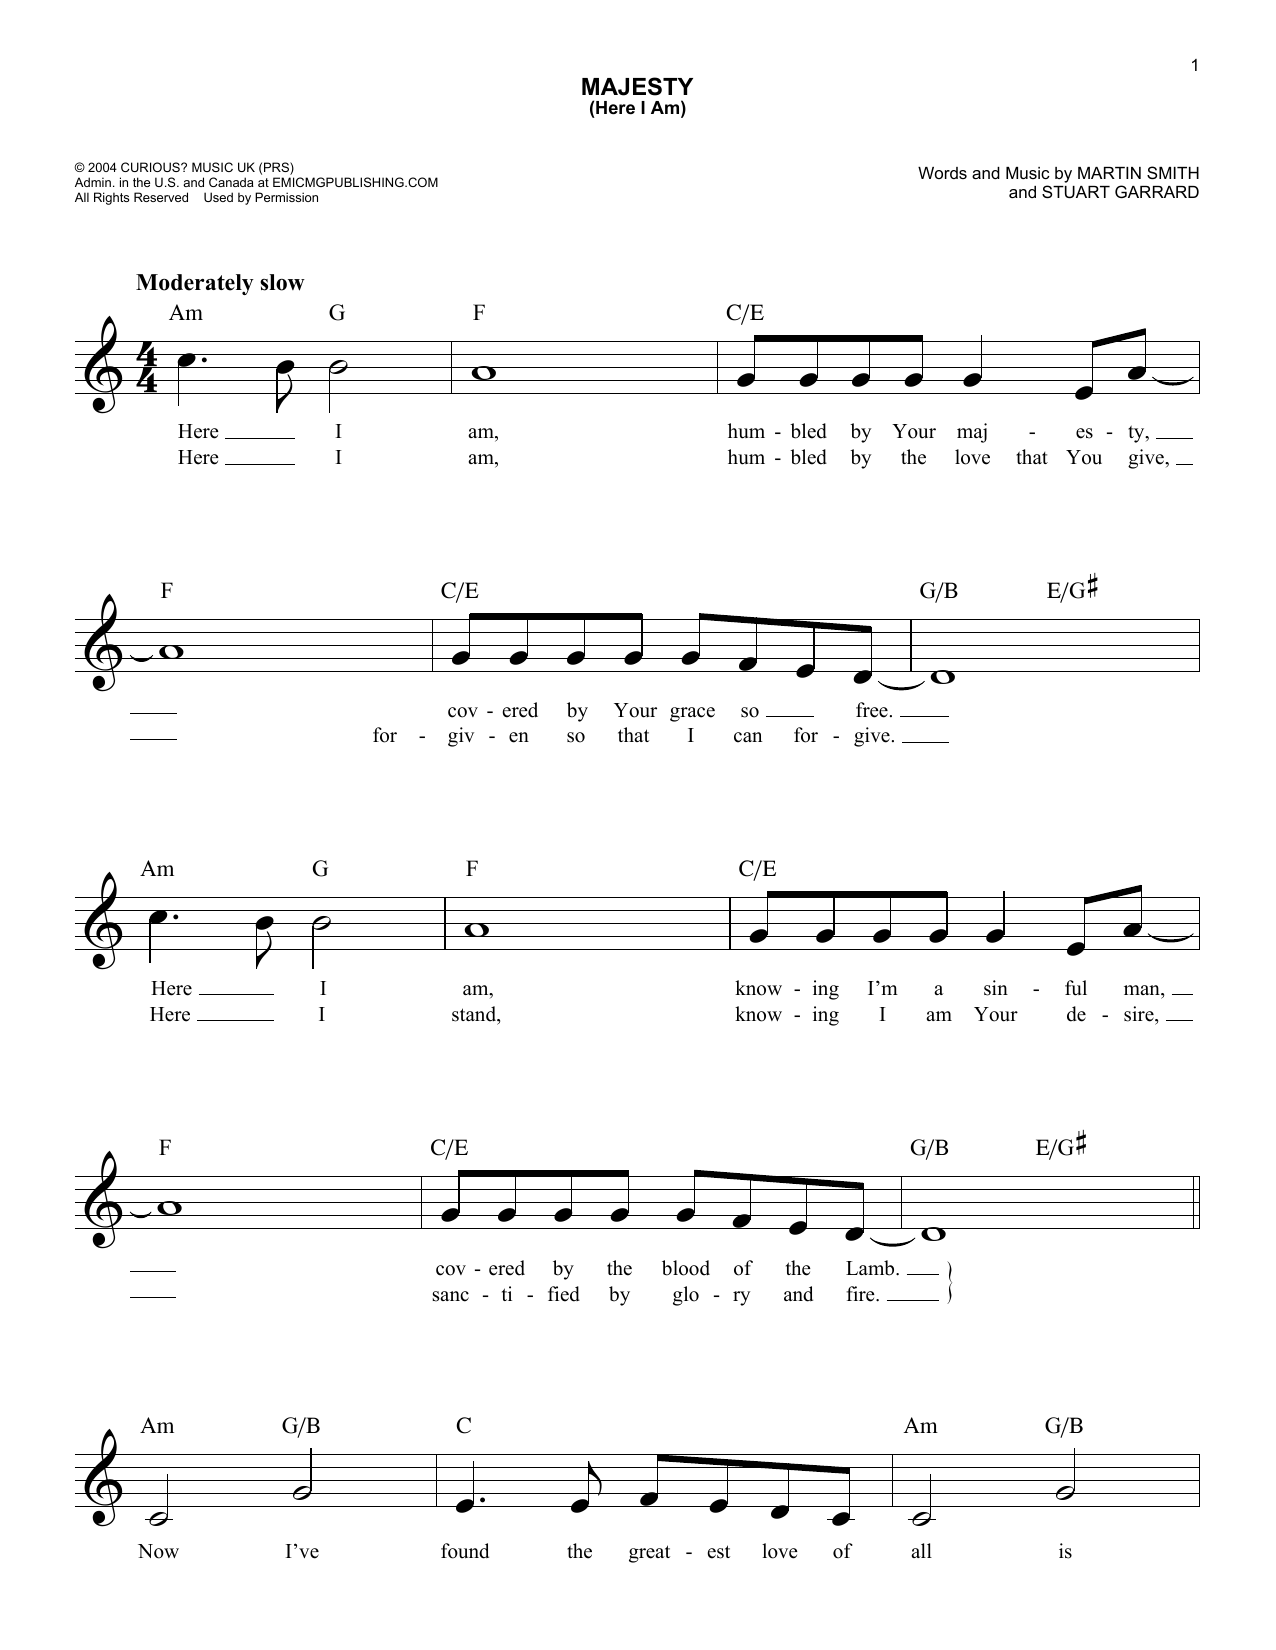 Delirious? Majesty (Here I Am) sheet music notes and chords. Download Printable PDF.